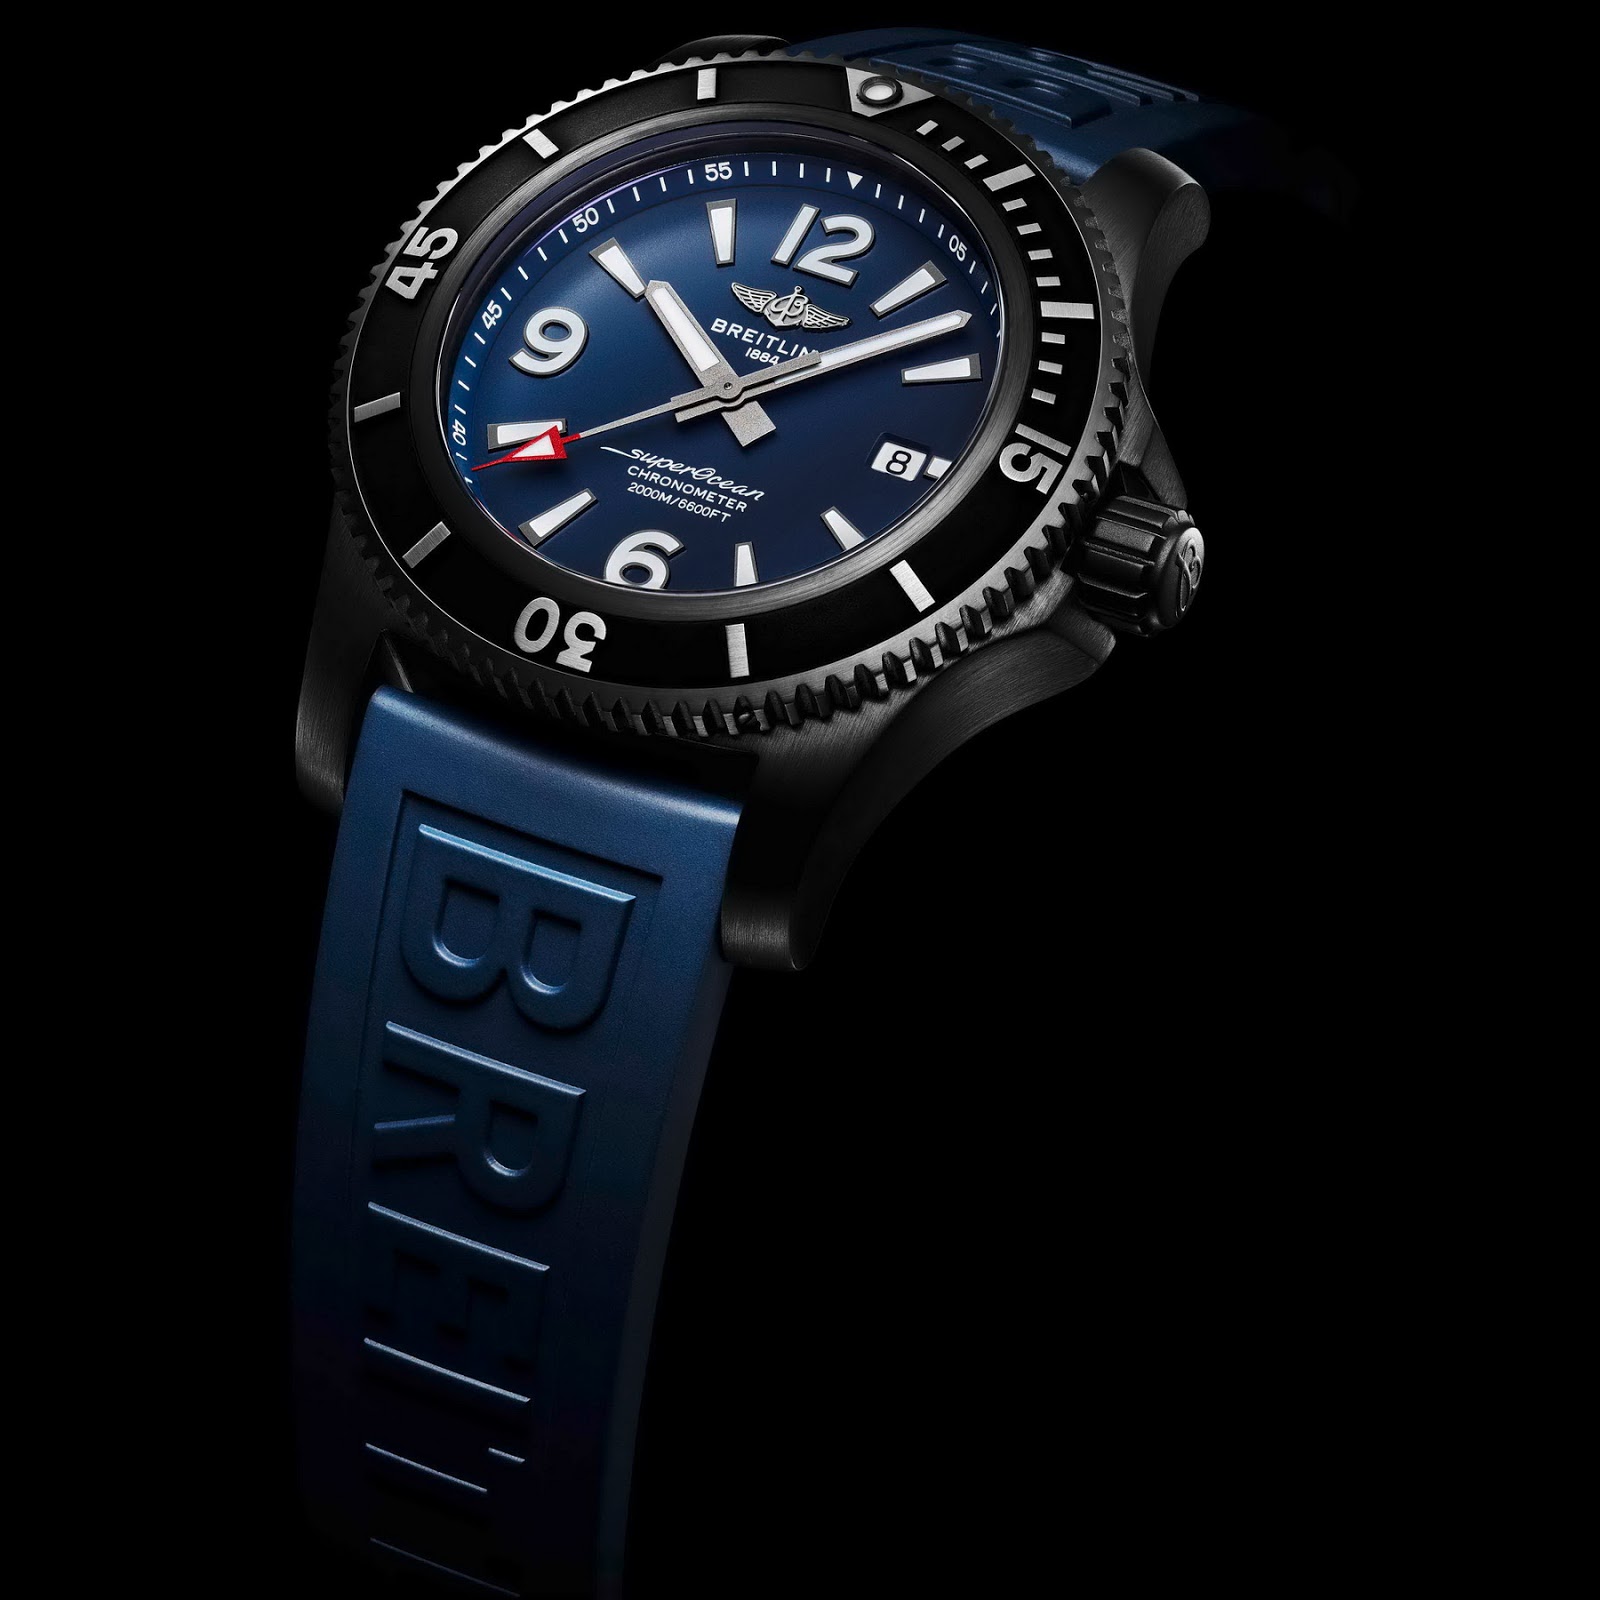 Breitling's newest from Baselworld 2019 BREITLING%2BSuperocean%2B46%2B01